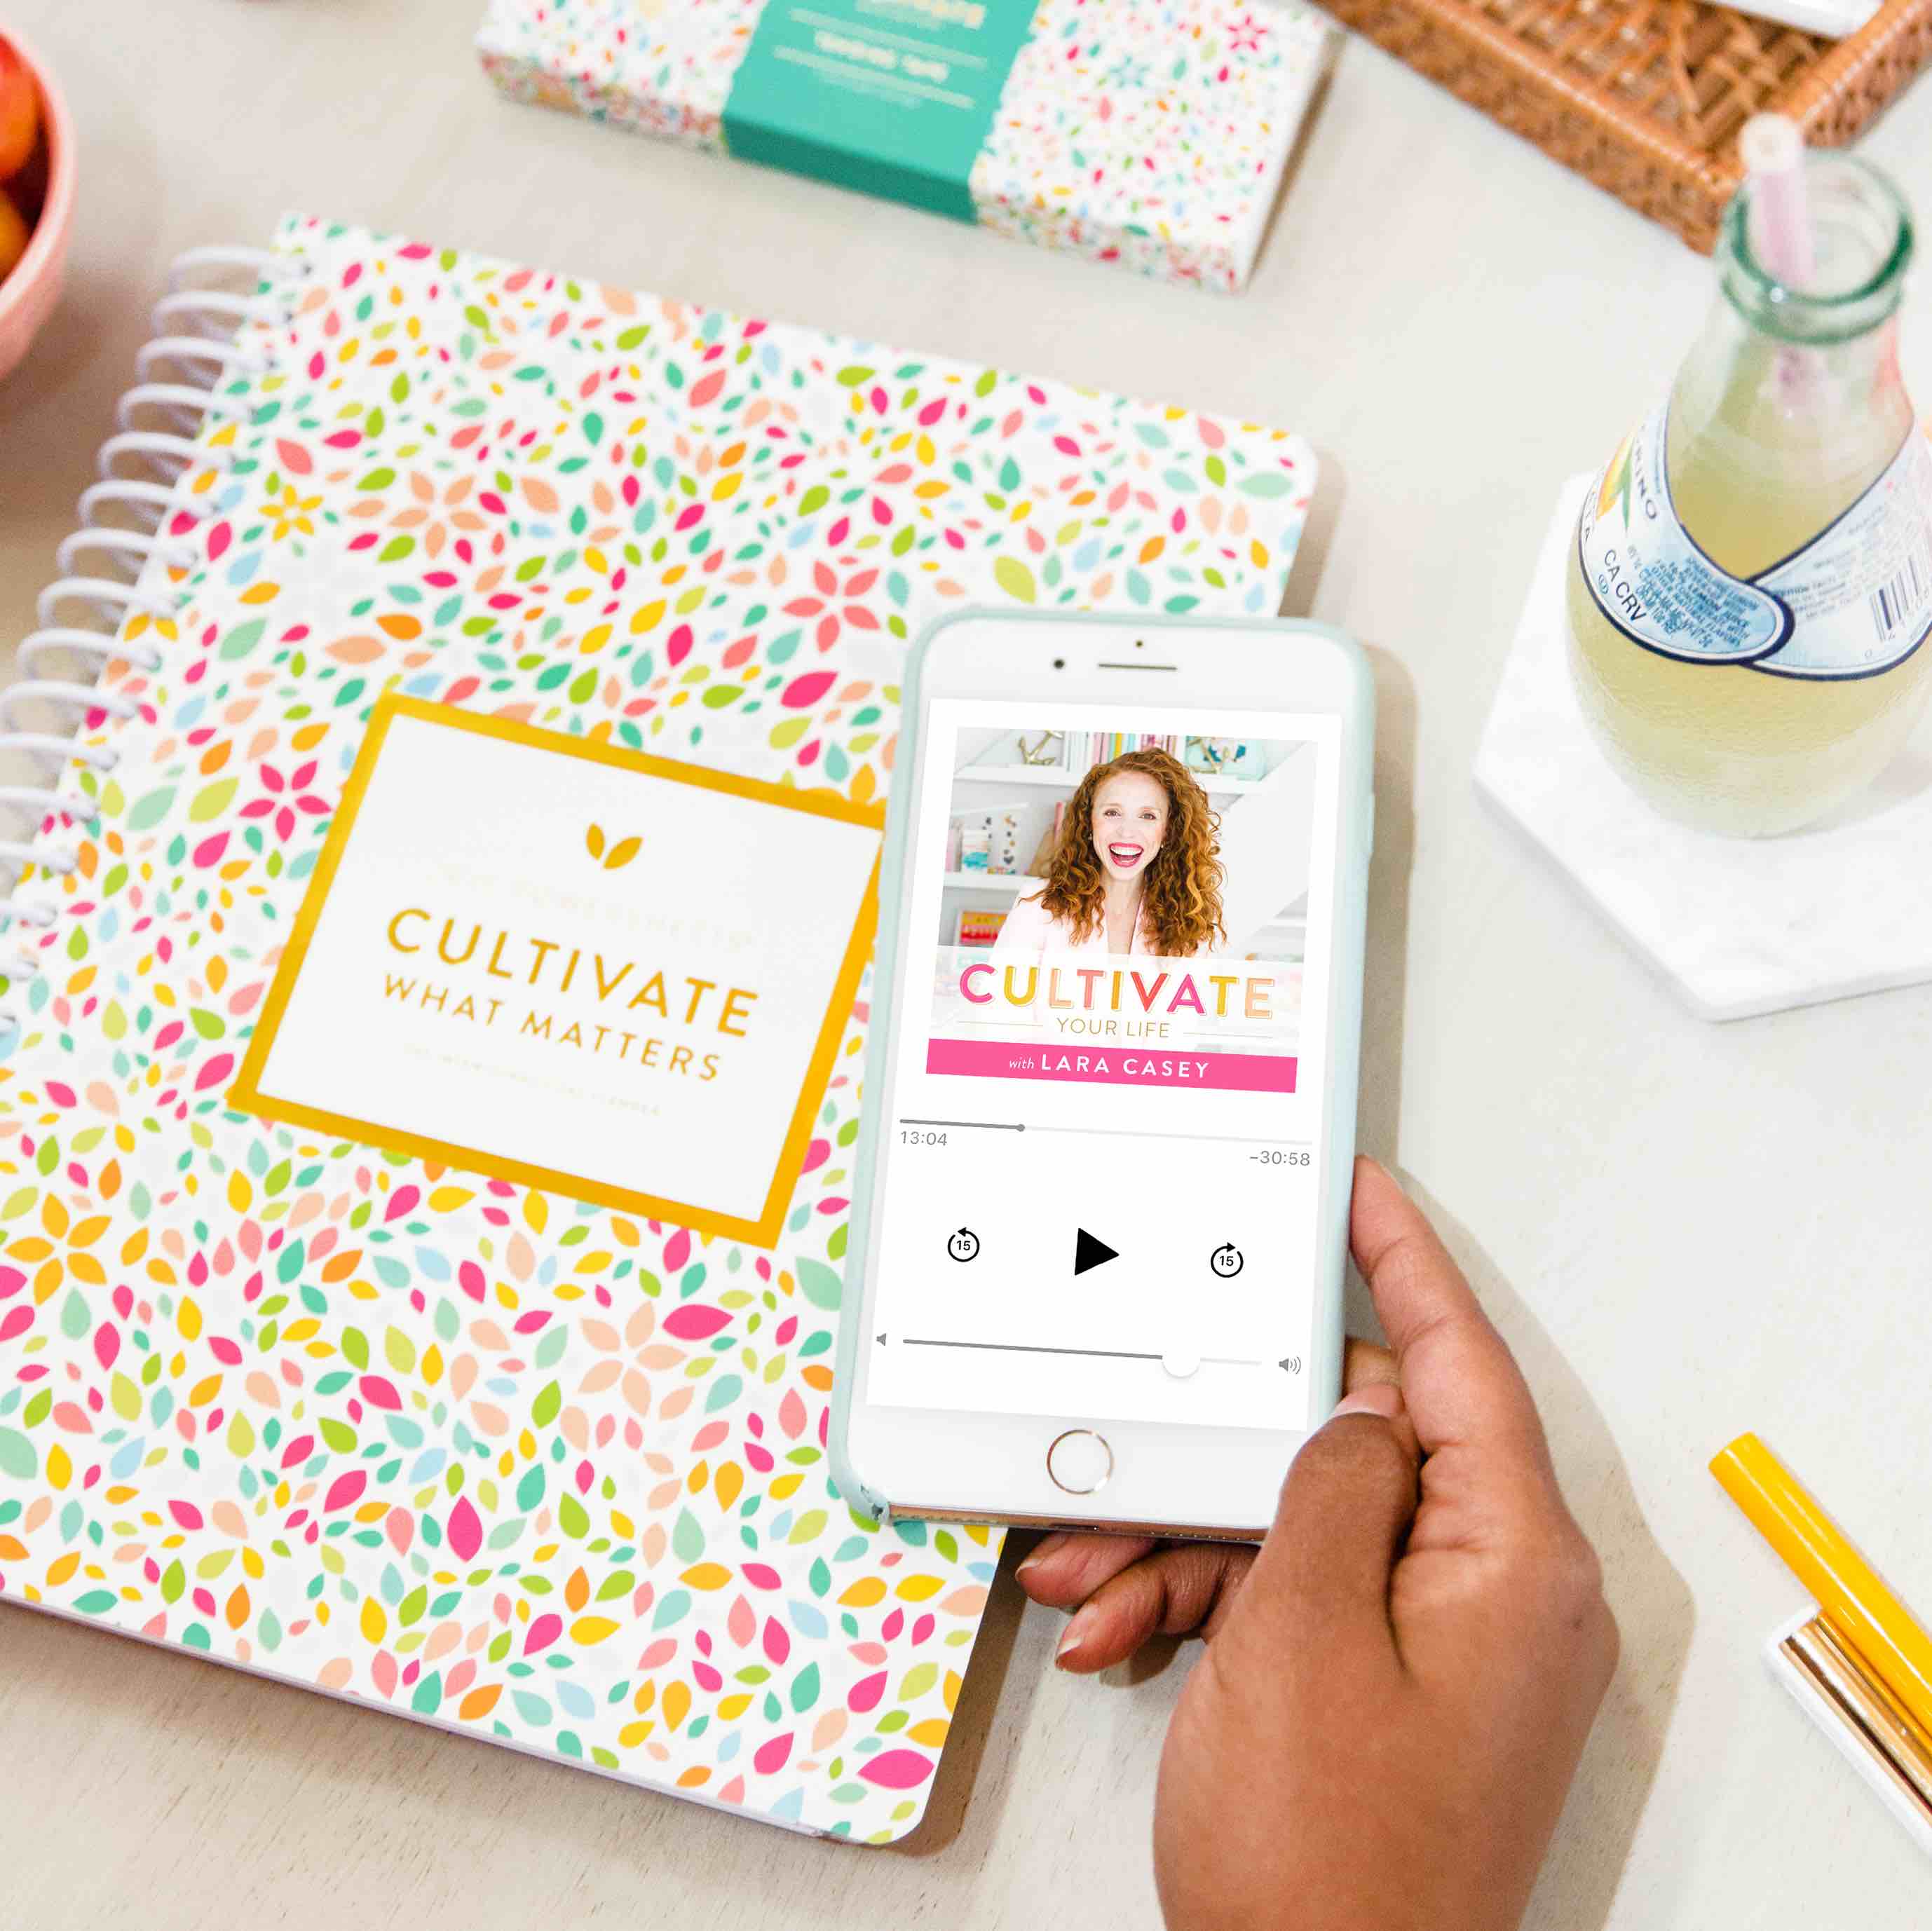 5 Best Planners for 2019 by Dr. Jessica Louie, Clarify Simplify Align. Free download Goal Setting for Busy Professionals. Cultivate What Matters Powersheets, Full Focus Planner review, High Performance Planner, Erin Condren planner review, Emily Ley Planner